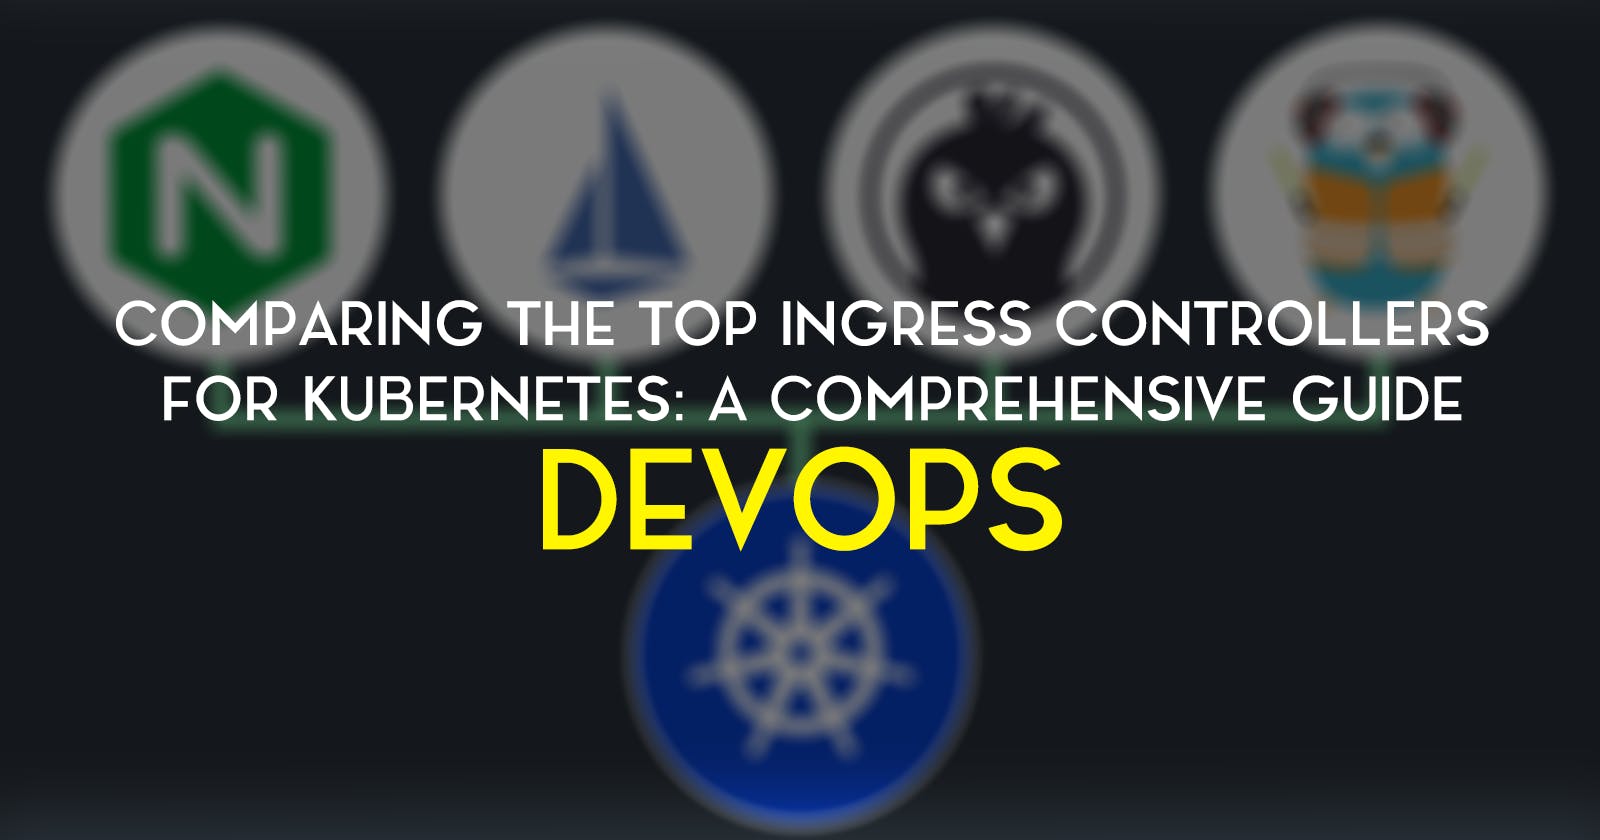 Comparing the Top Ingress Controllers for Kubernetes: A Comprehensive Guide